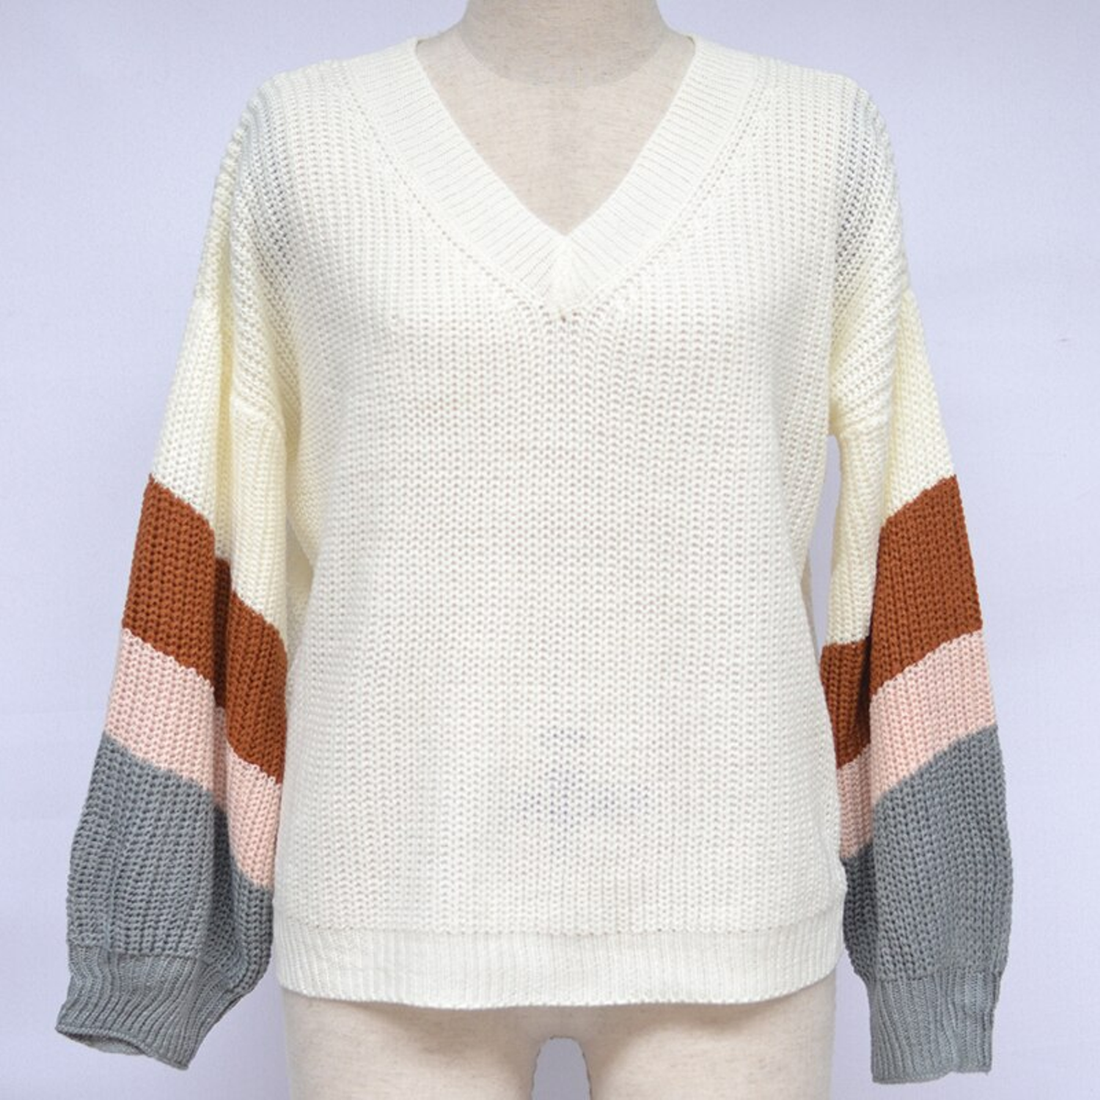 Women's Autumn/Winter V-Neck Loose Knitted Sweater